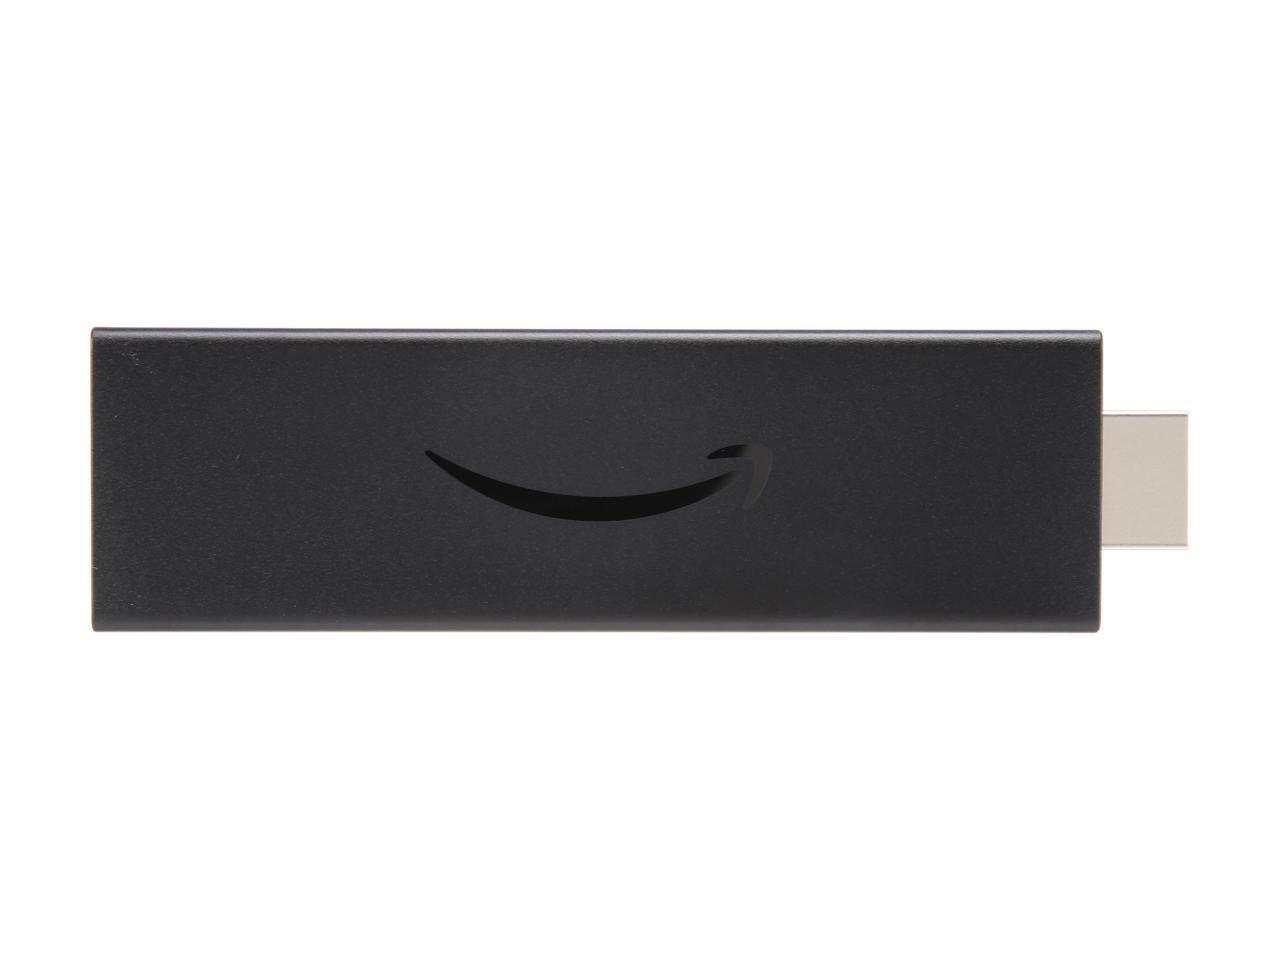 Amazon Fire TV Stick 4K (53-008355) Streaming Media Player with 